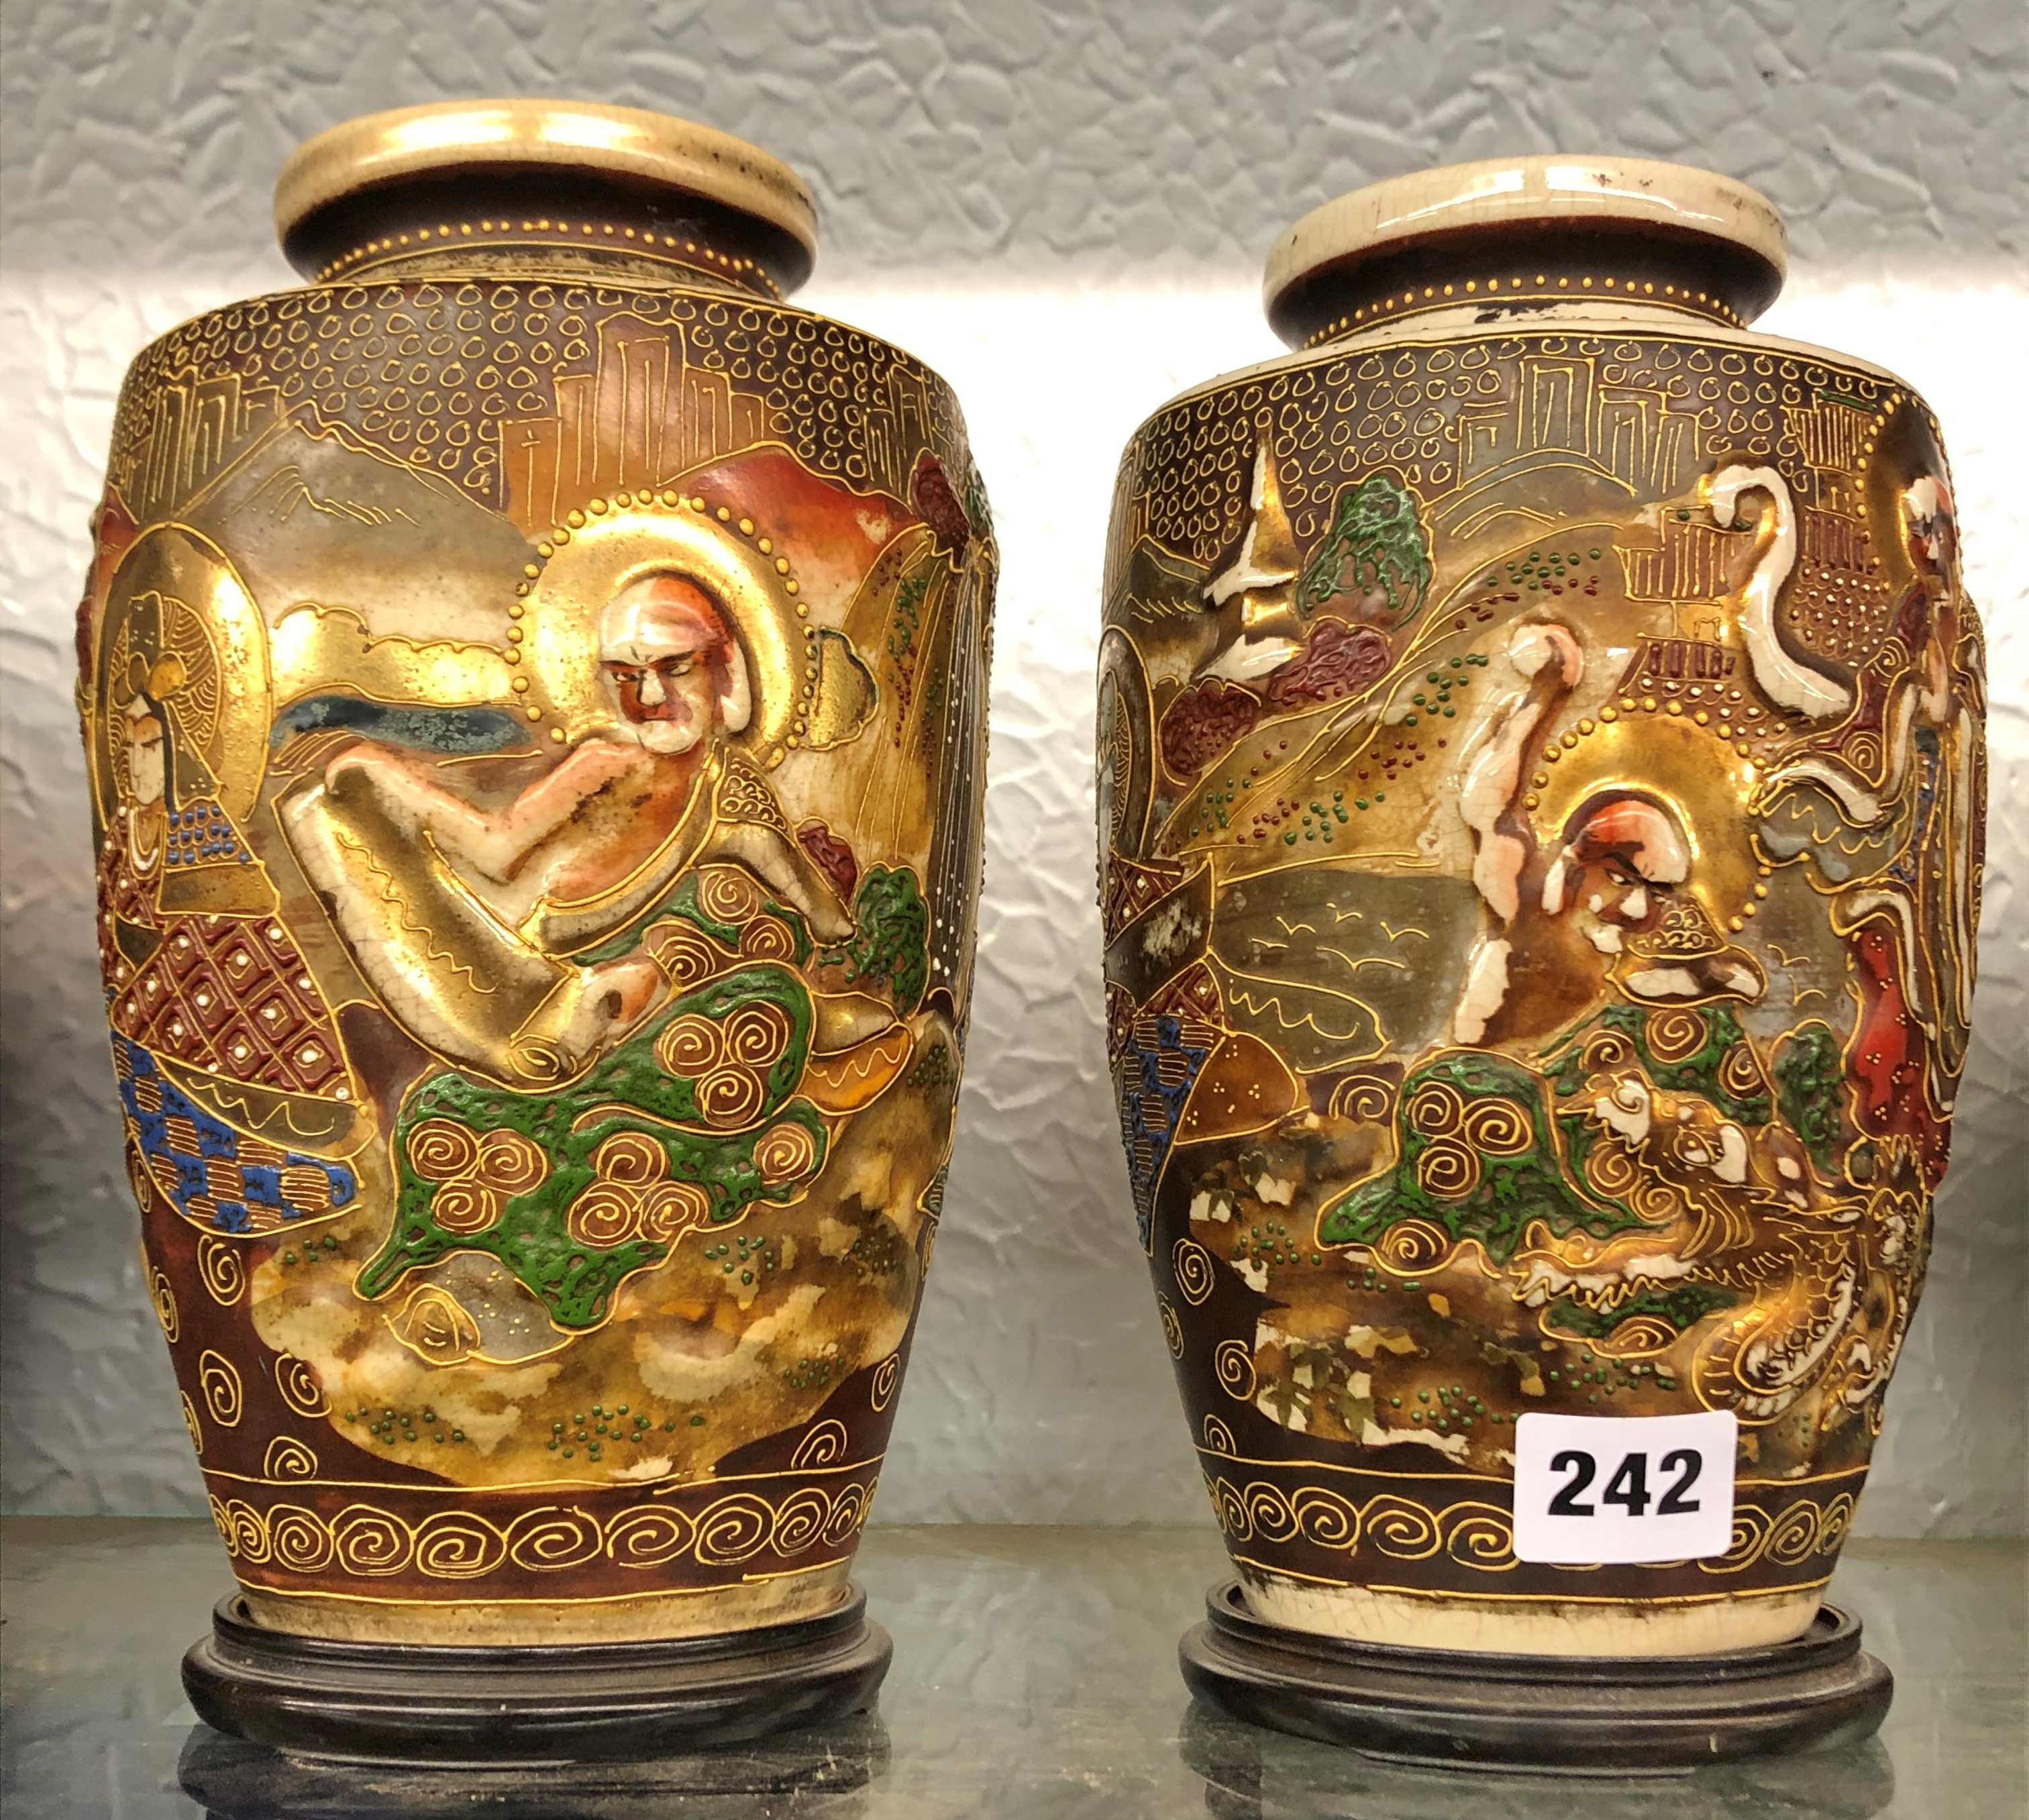 PAIR OF JAPANESE SATSUMA EARTHENWARE VASES ON STANDS 23.